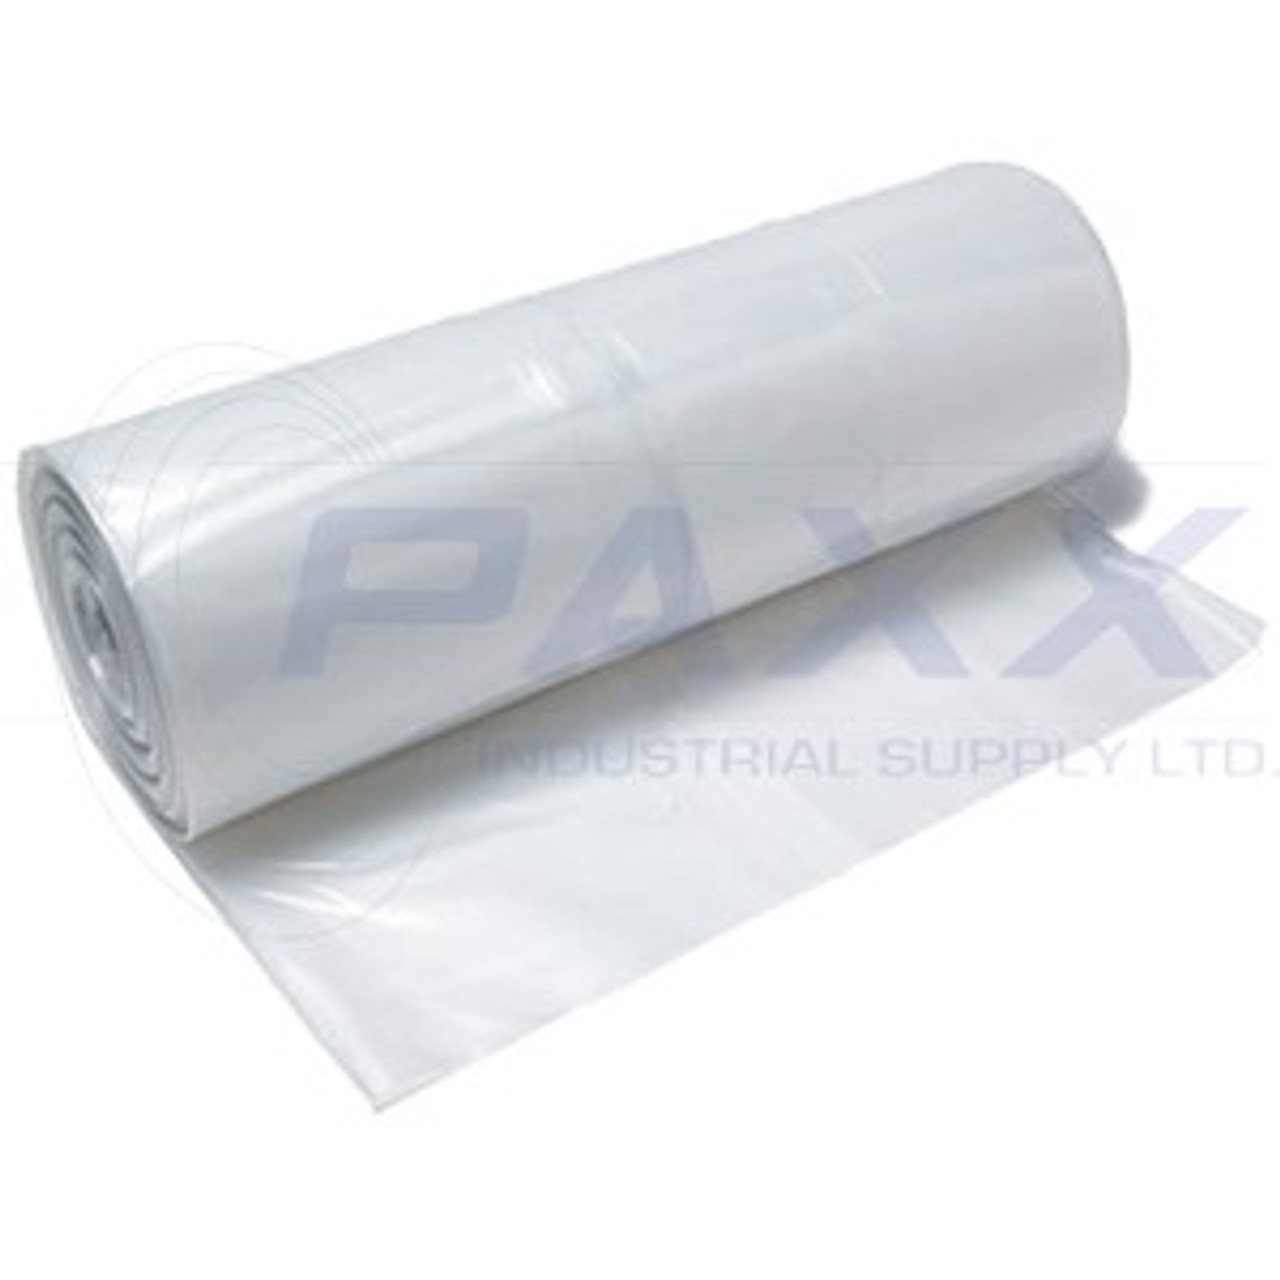 Top Cover 72" x 72" 1.5 mil Clear Perf  200 sheets / roll